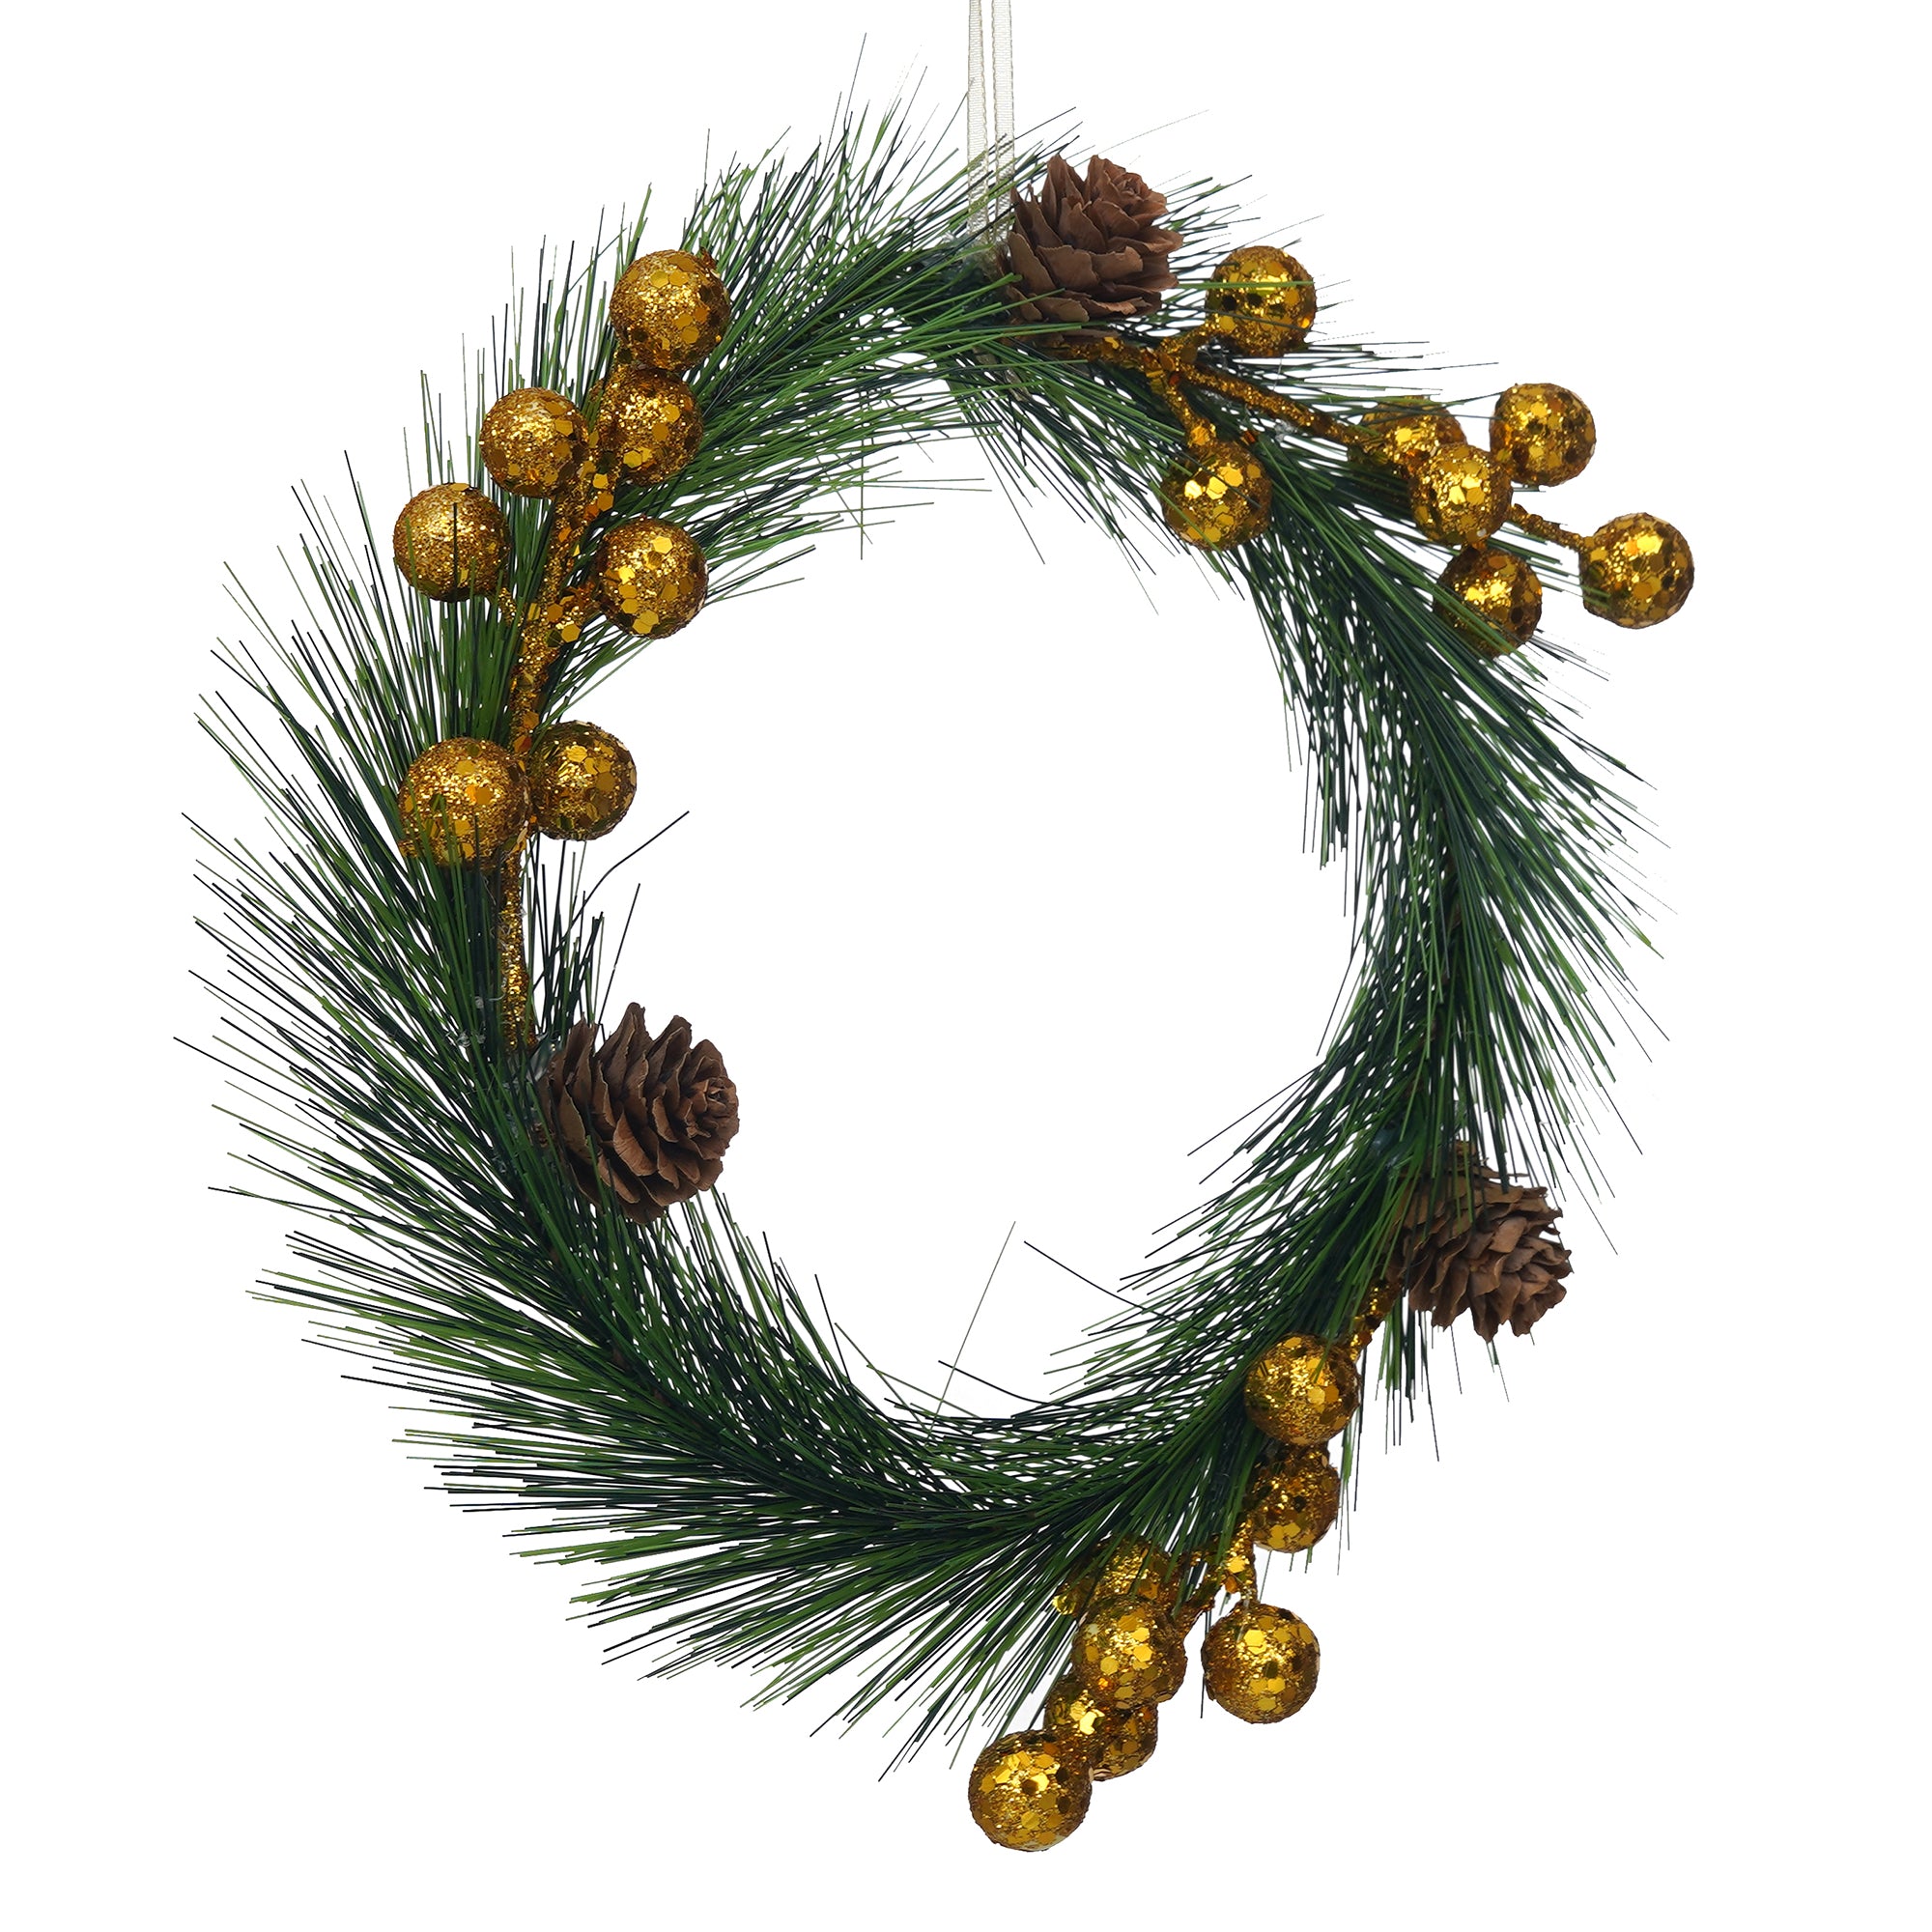 eCraftIndia Green Christmas Wreath with Gold Balls and Flowers Decorative Ornaments 6